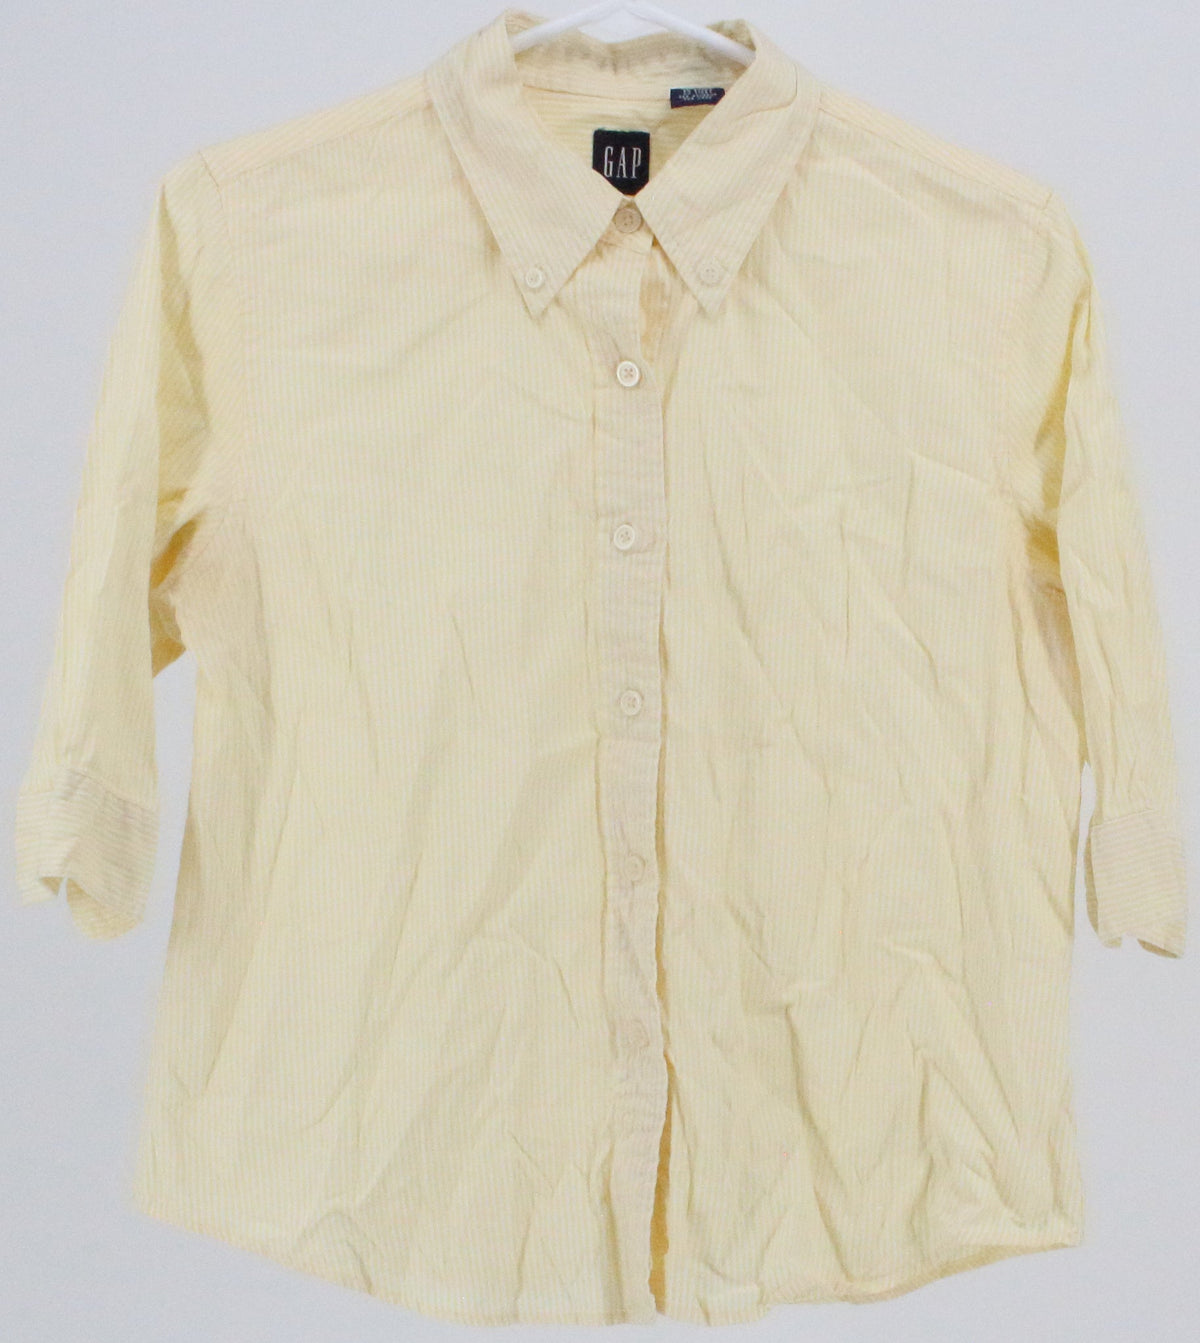 Gap Yellow and White Striped Blouse